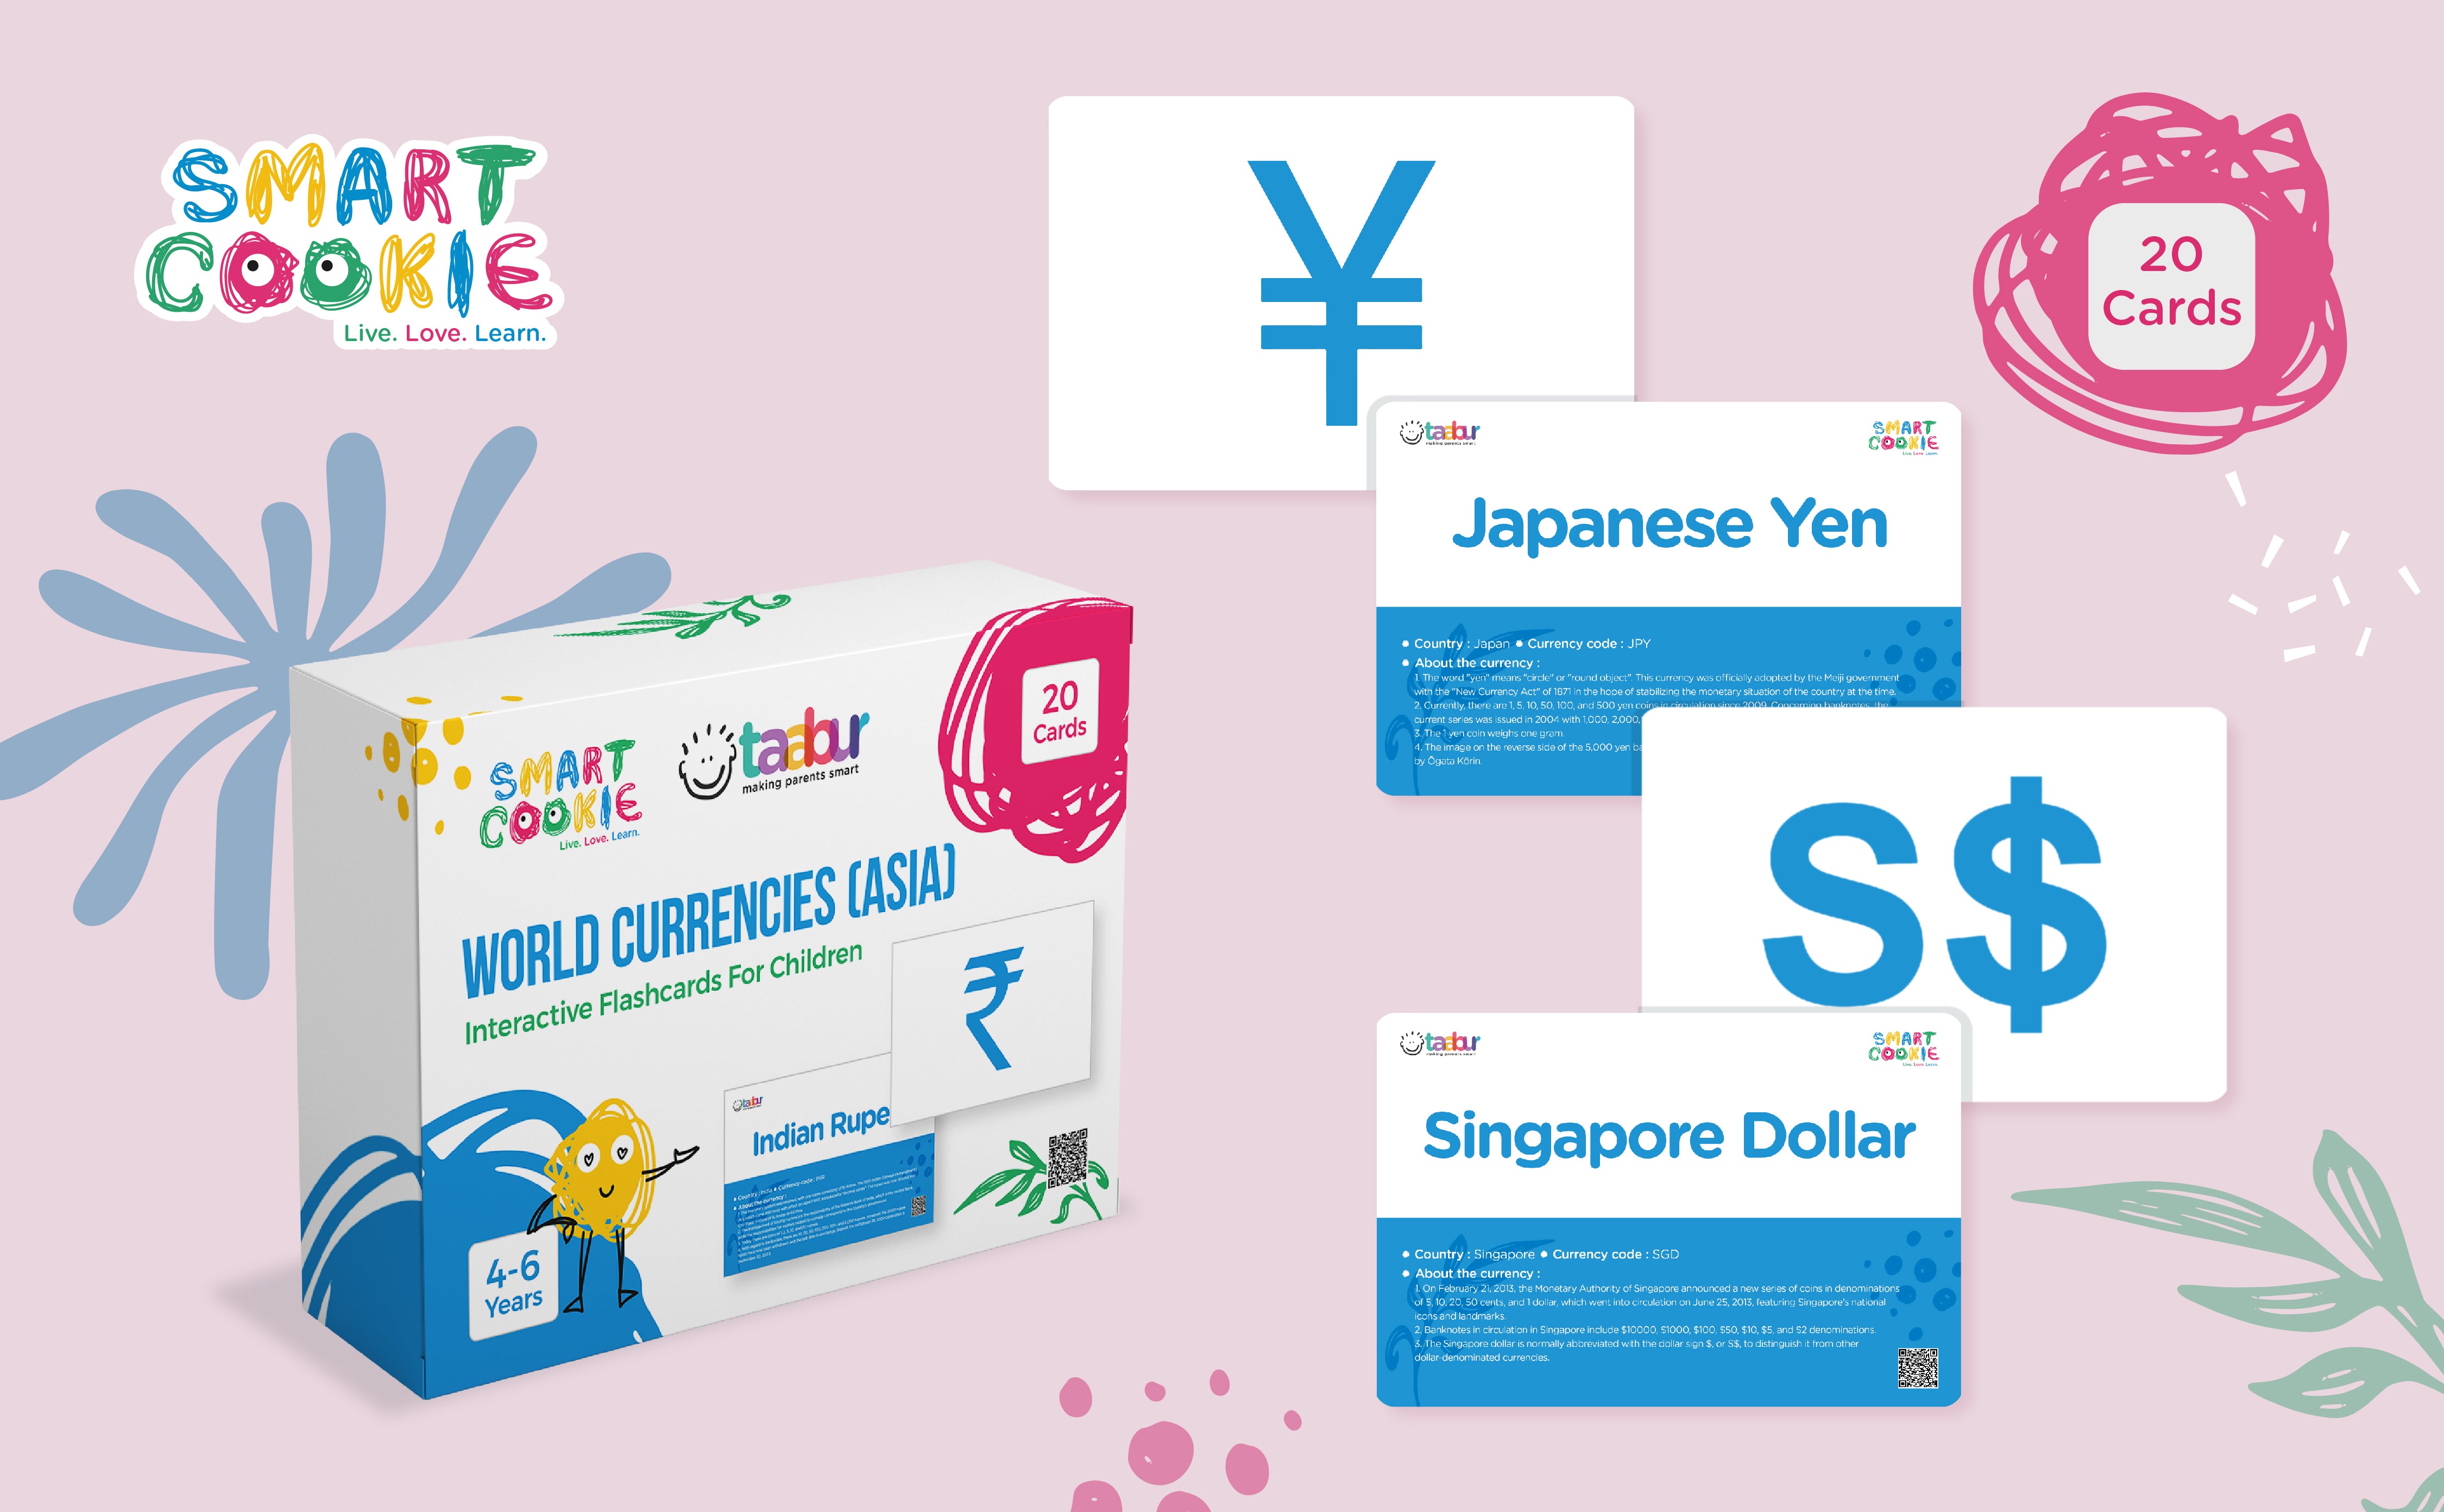 World Currencies (Asia) - Interactive Flash Cards for Children (20 Cards) - for Kids Aged 4 to 6 Years Old